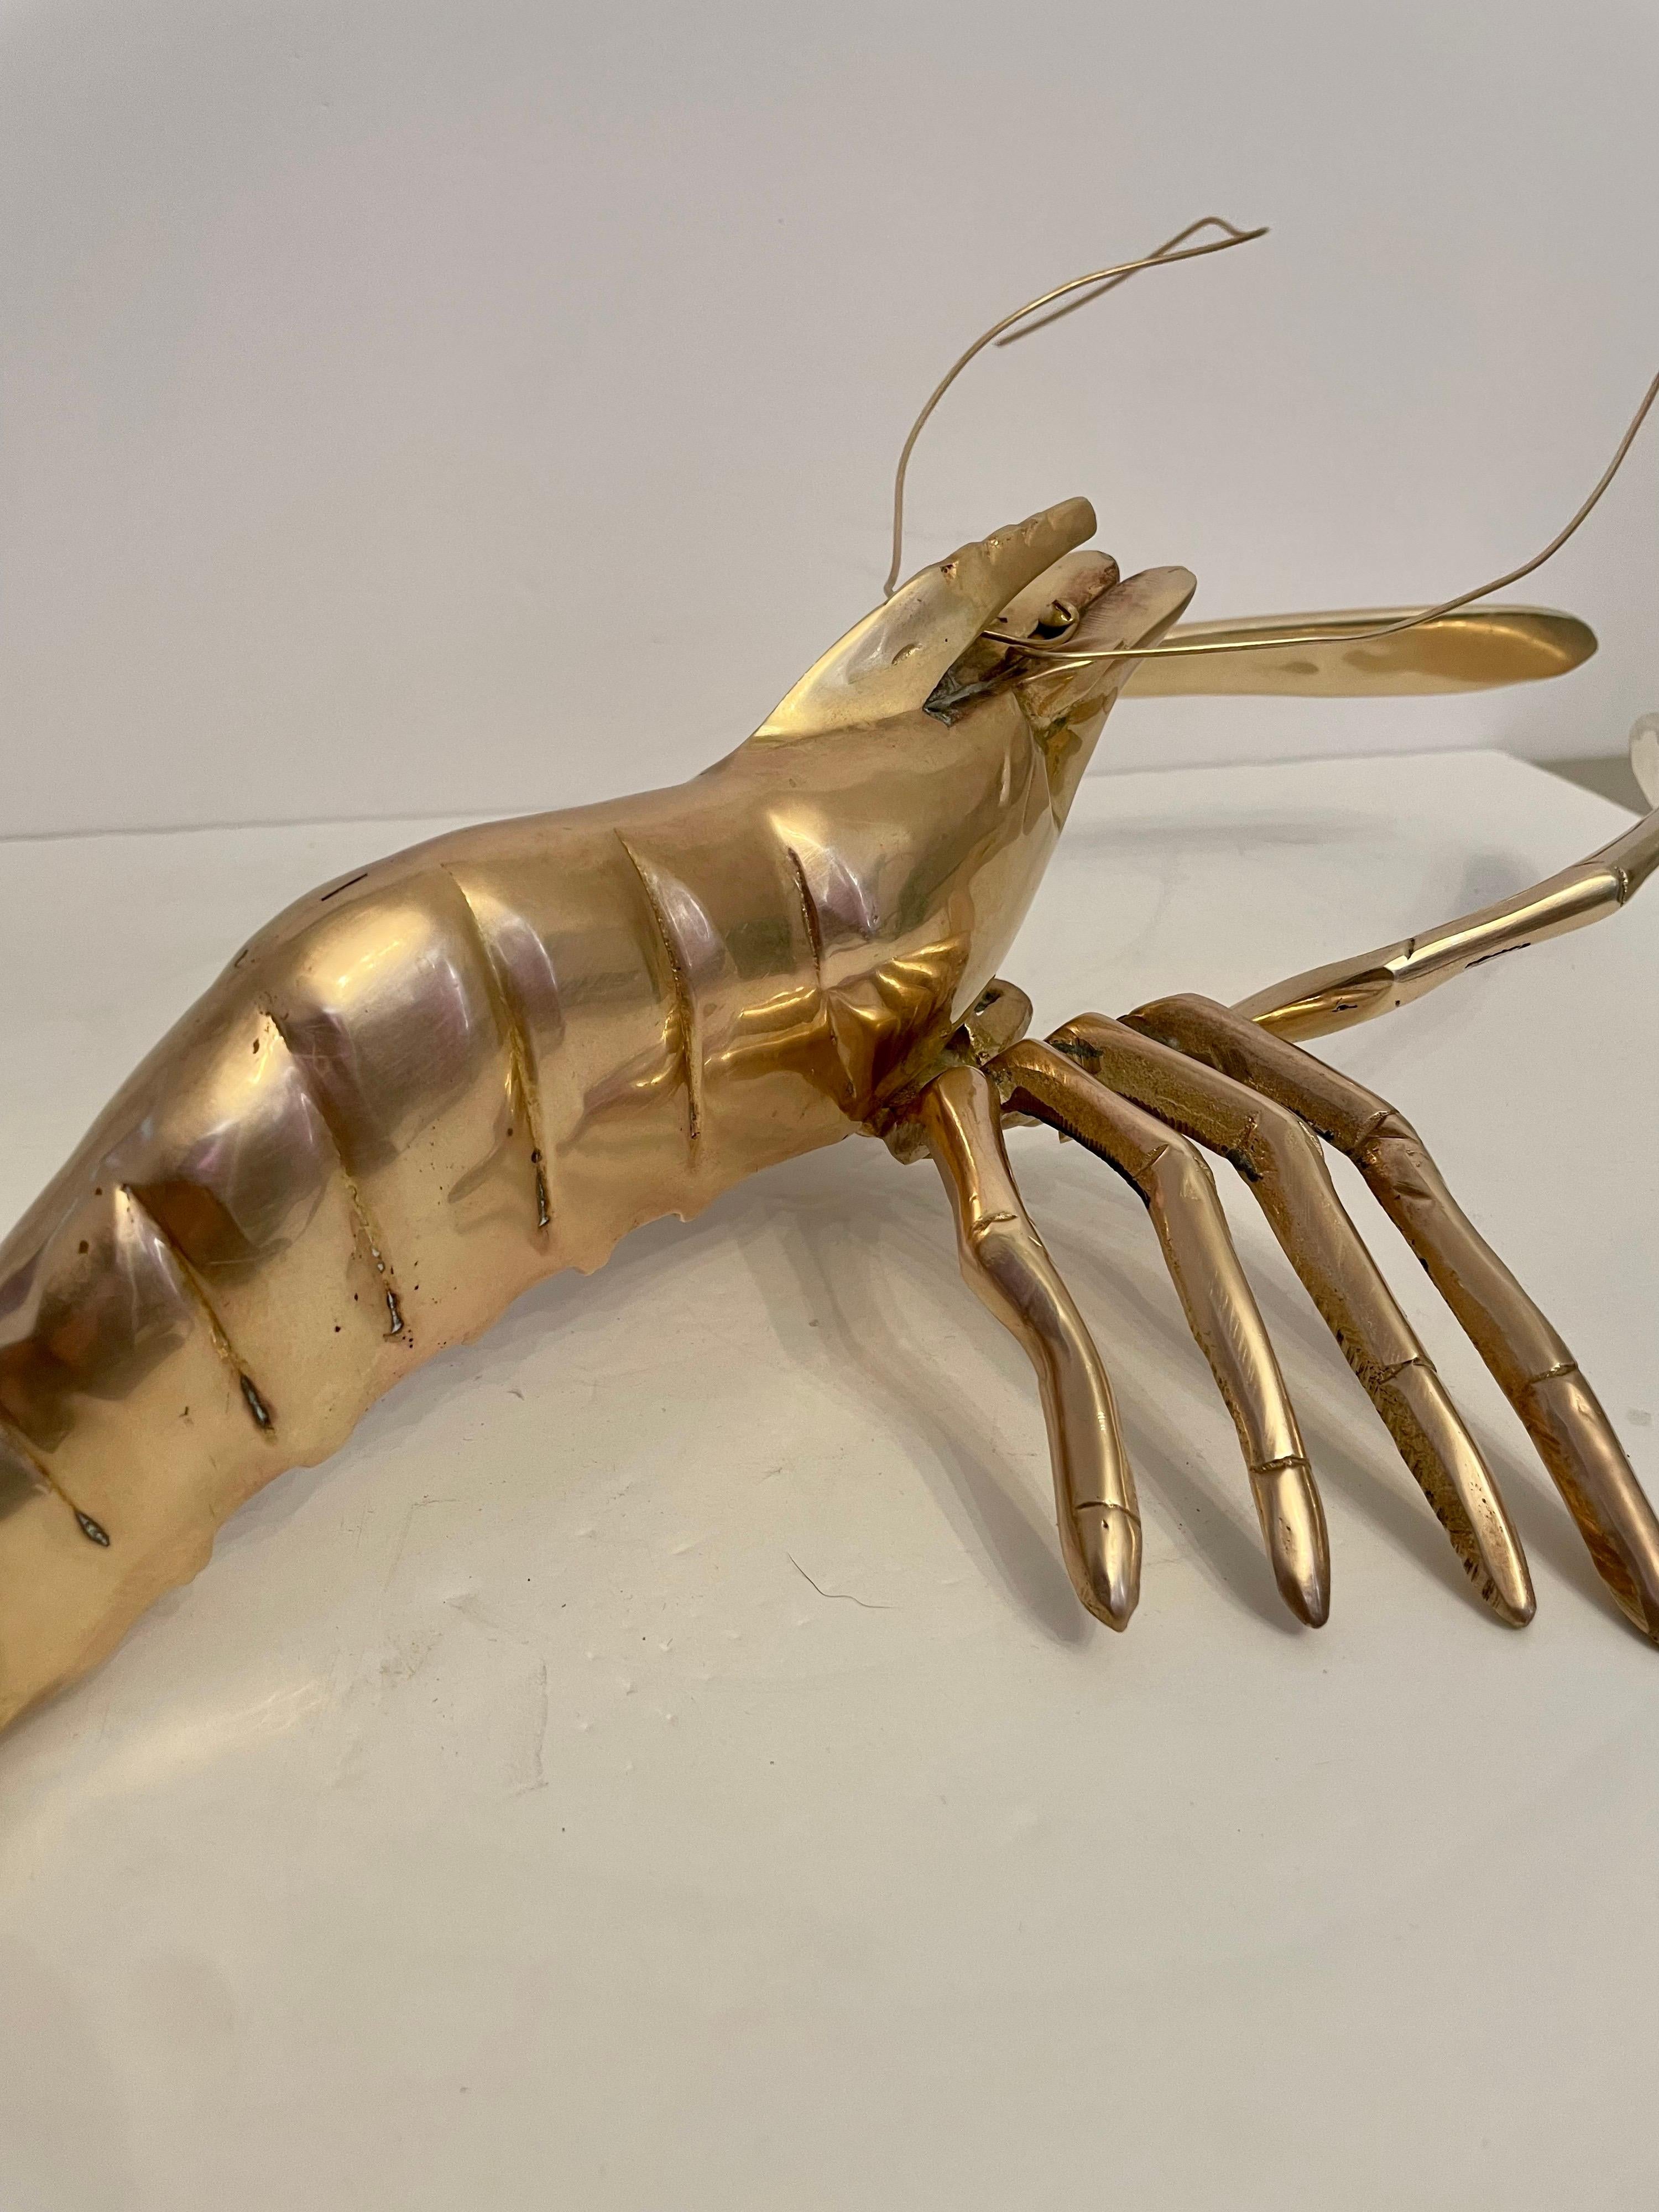 20th Century Giant Brass Crawfish Nautical Sculpture For Sale